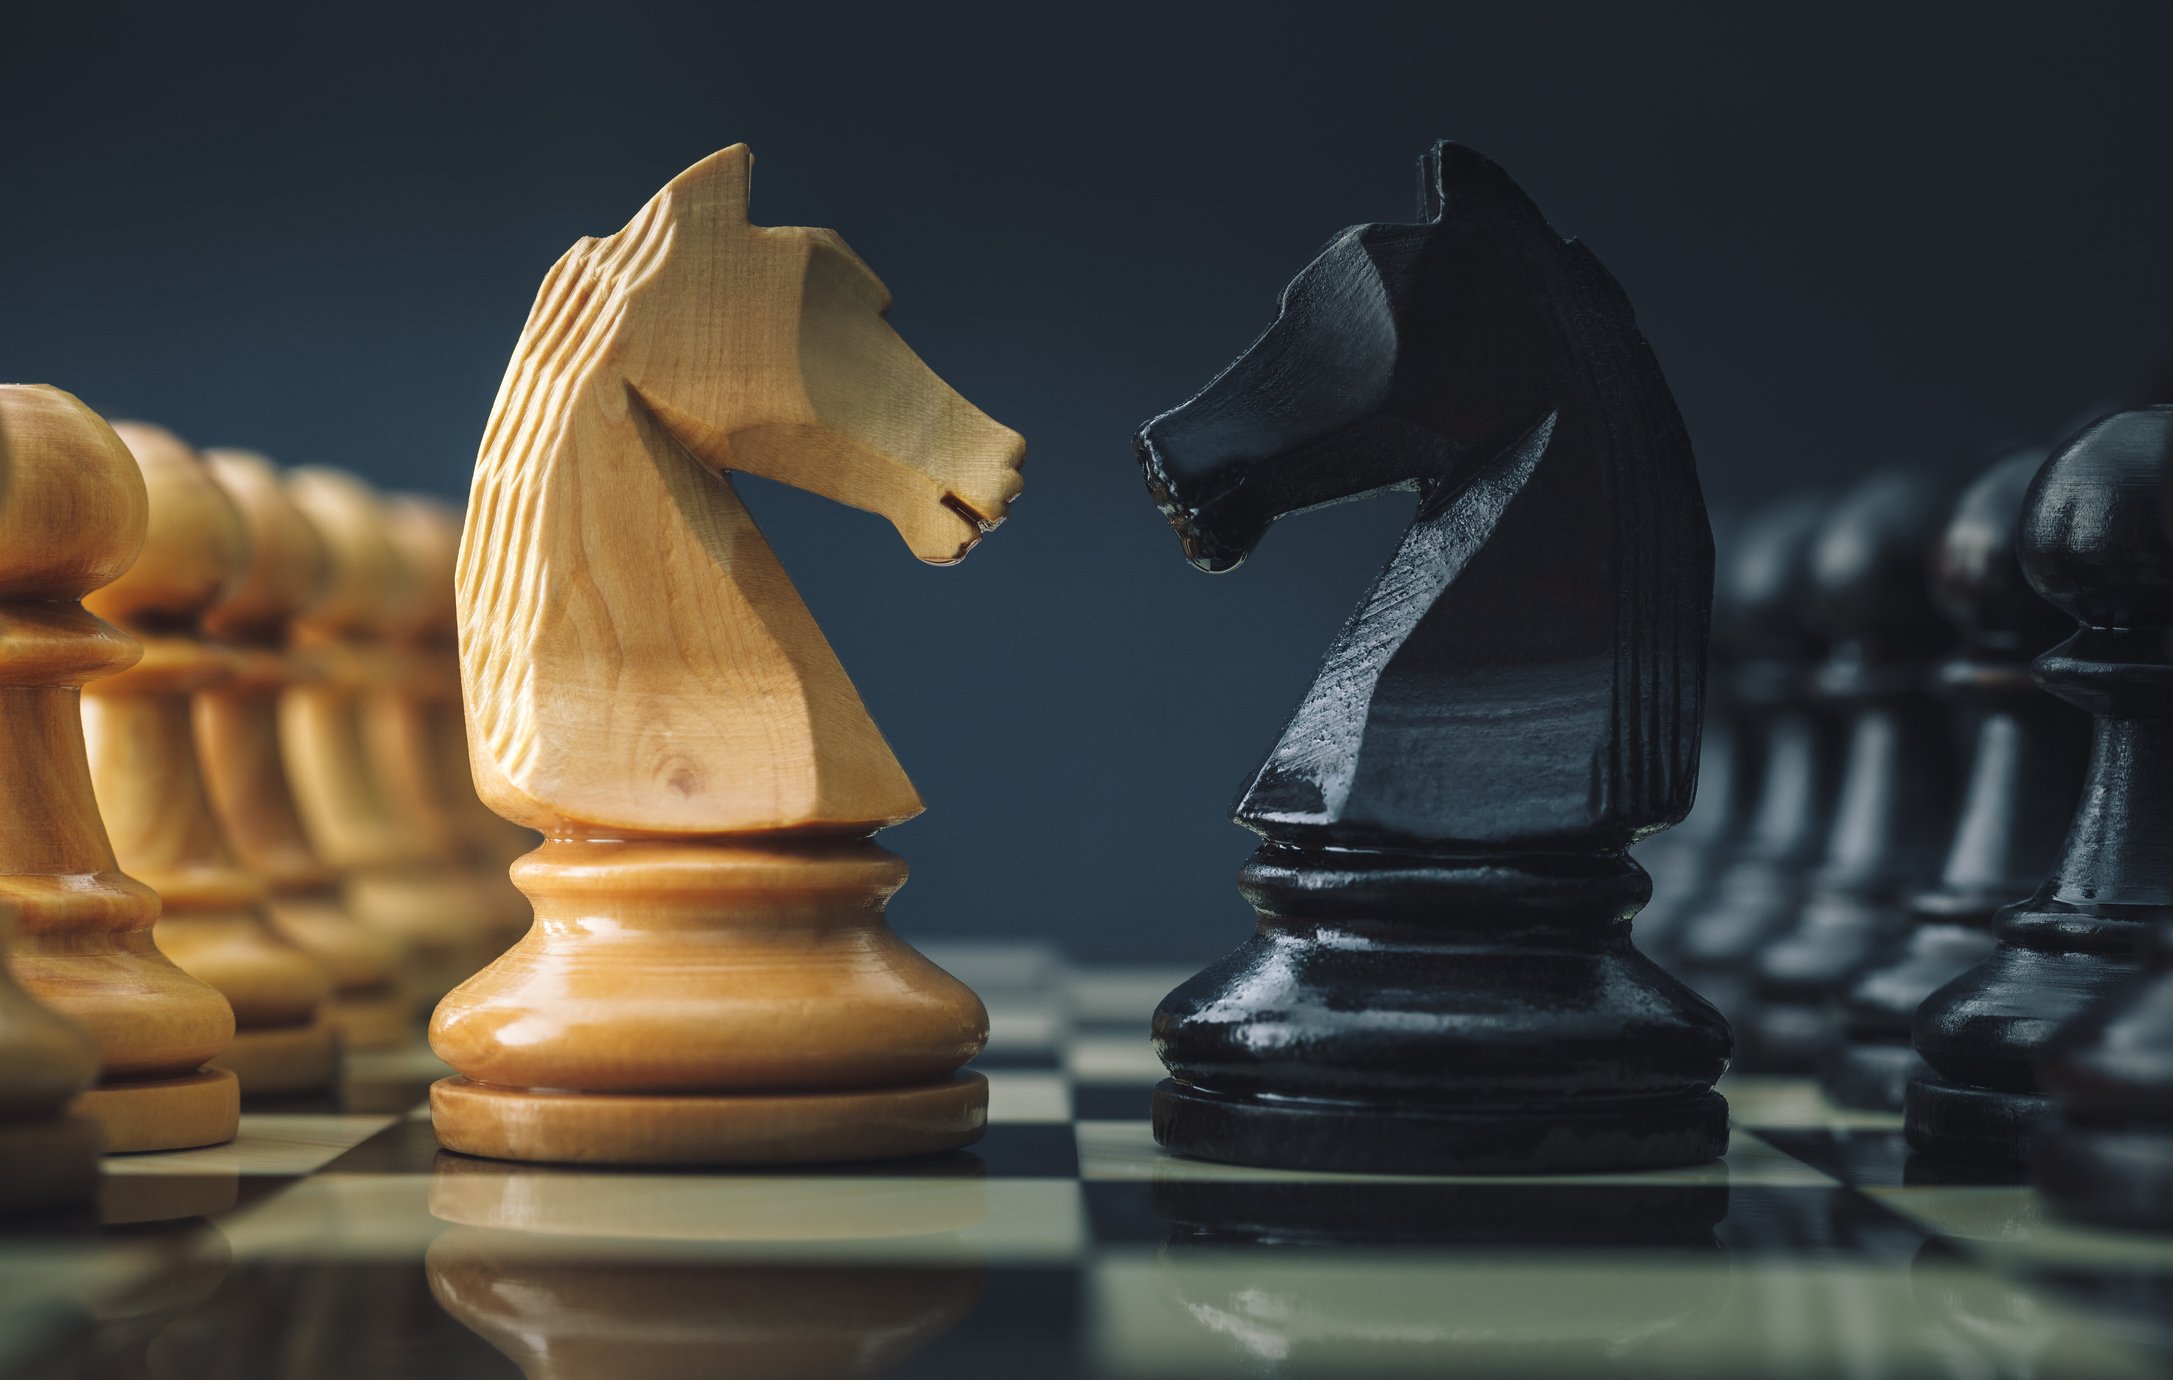 Images of two chess pieces right in front of each other